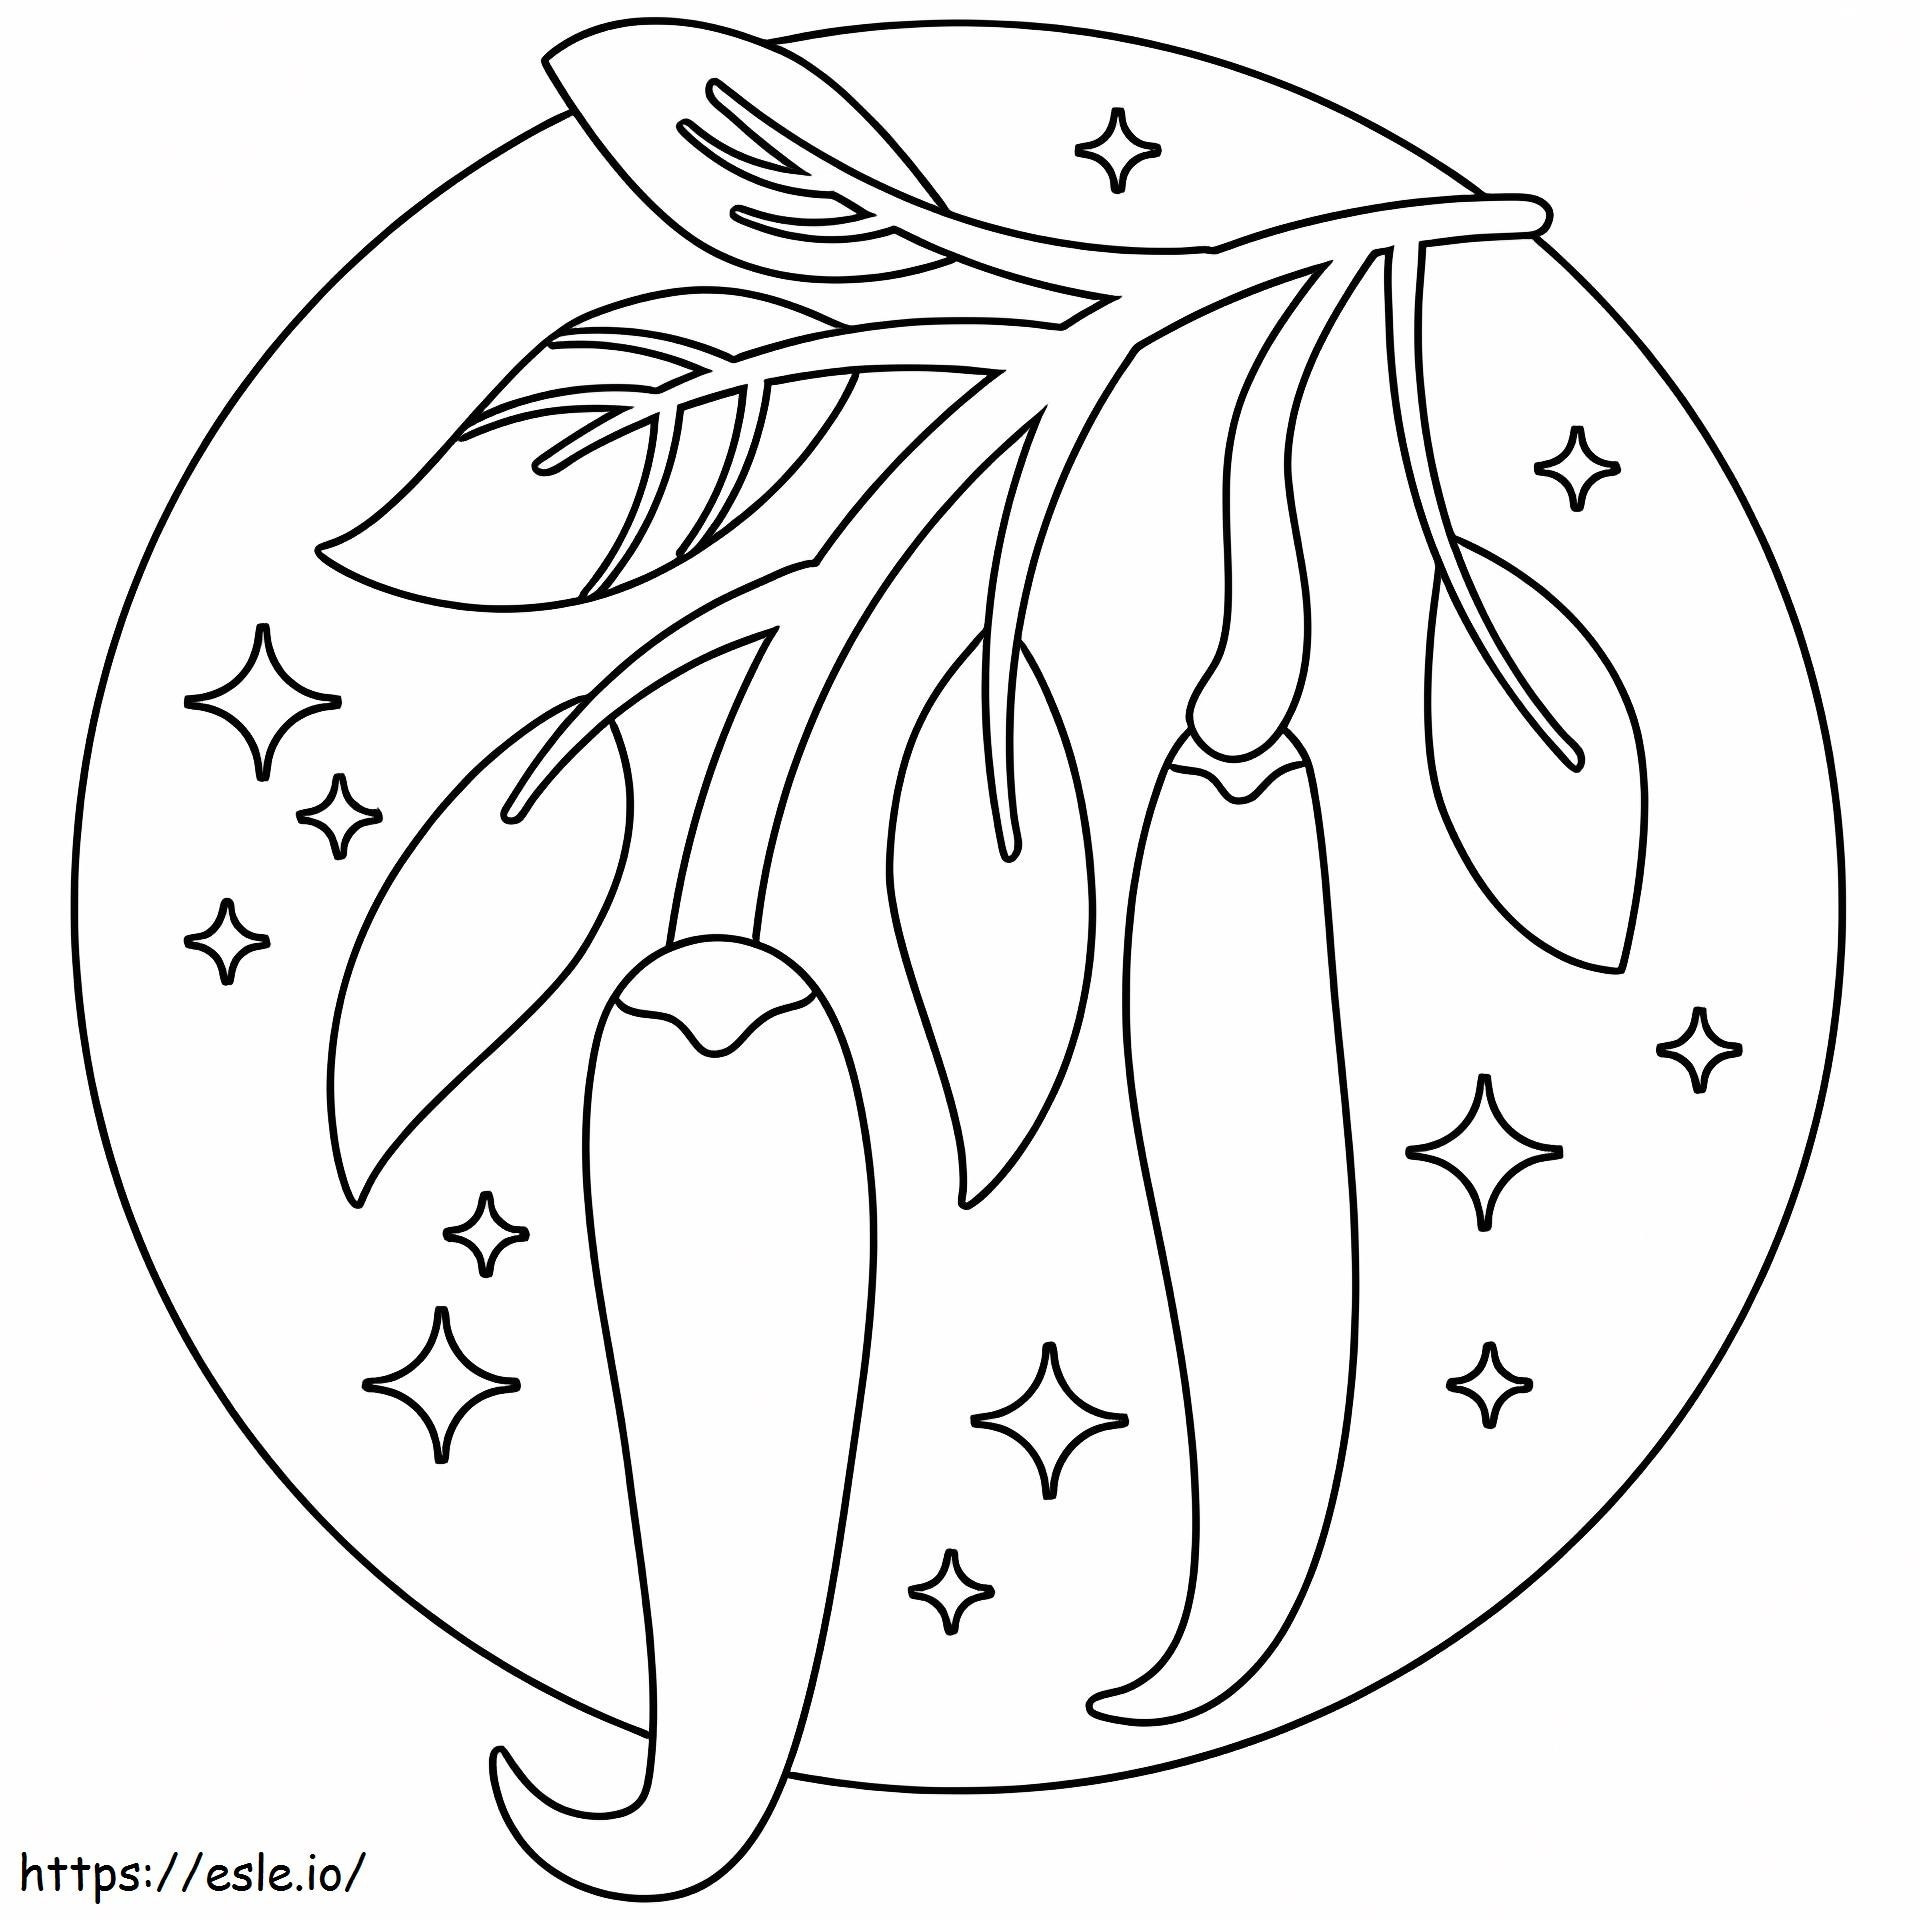 Three Chiles coloring page